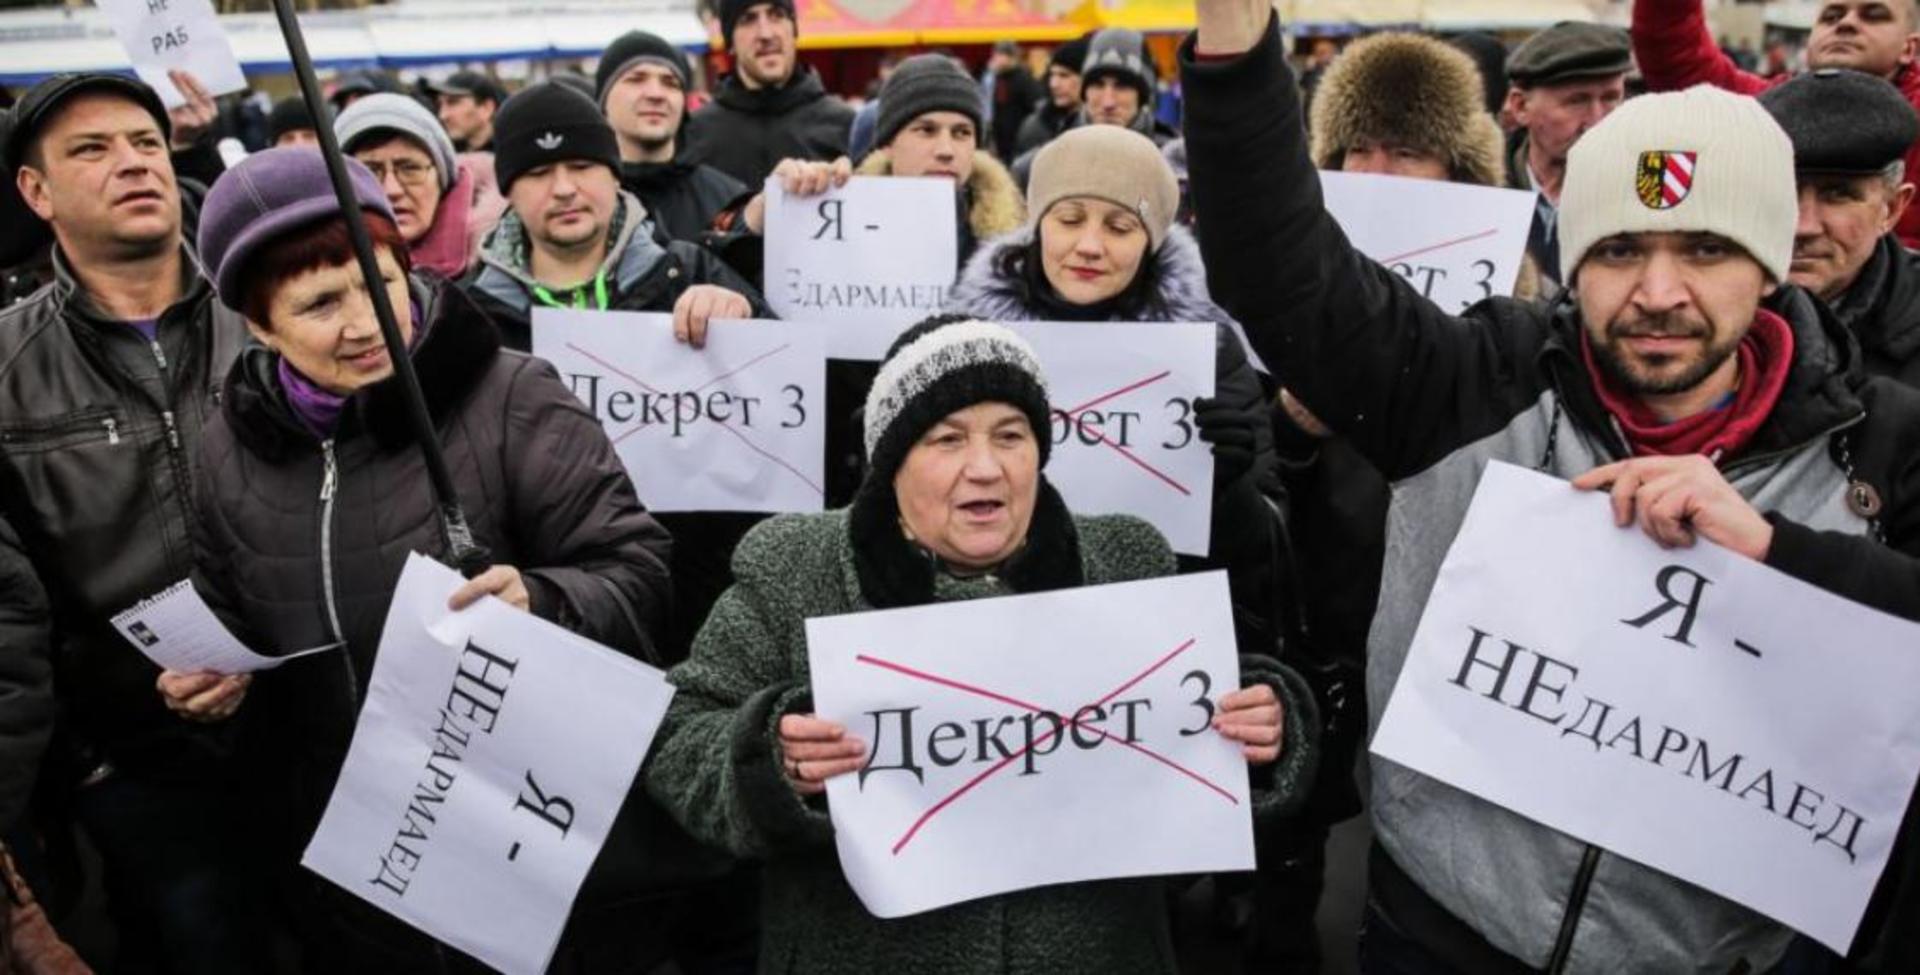 Belarusian authorities bolster tension in protest movement and relax business environment